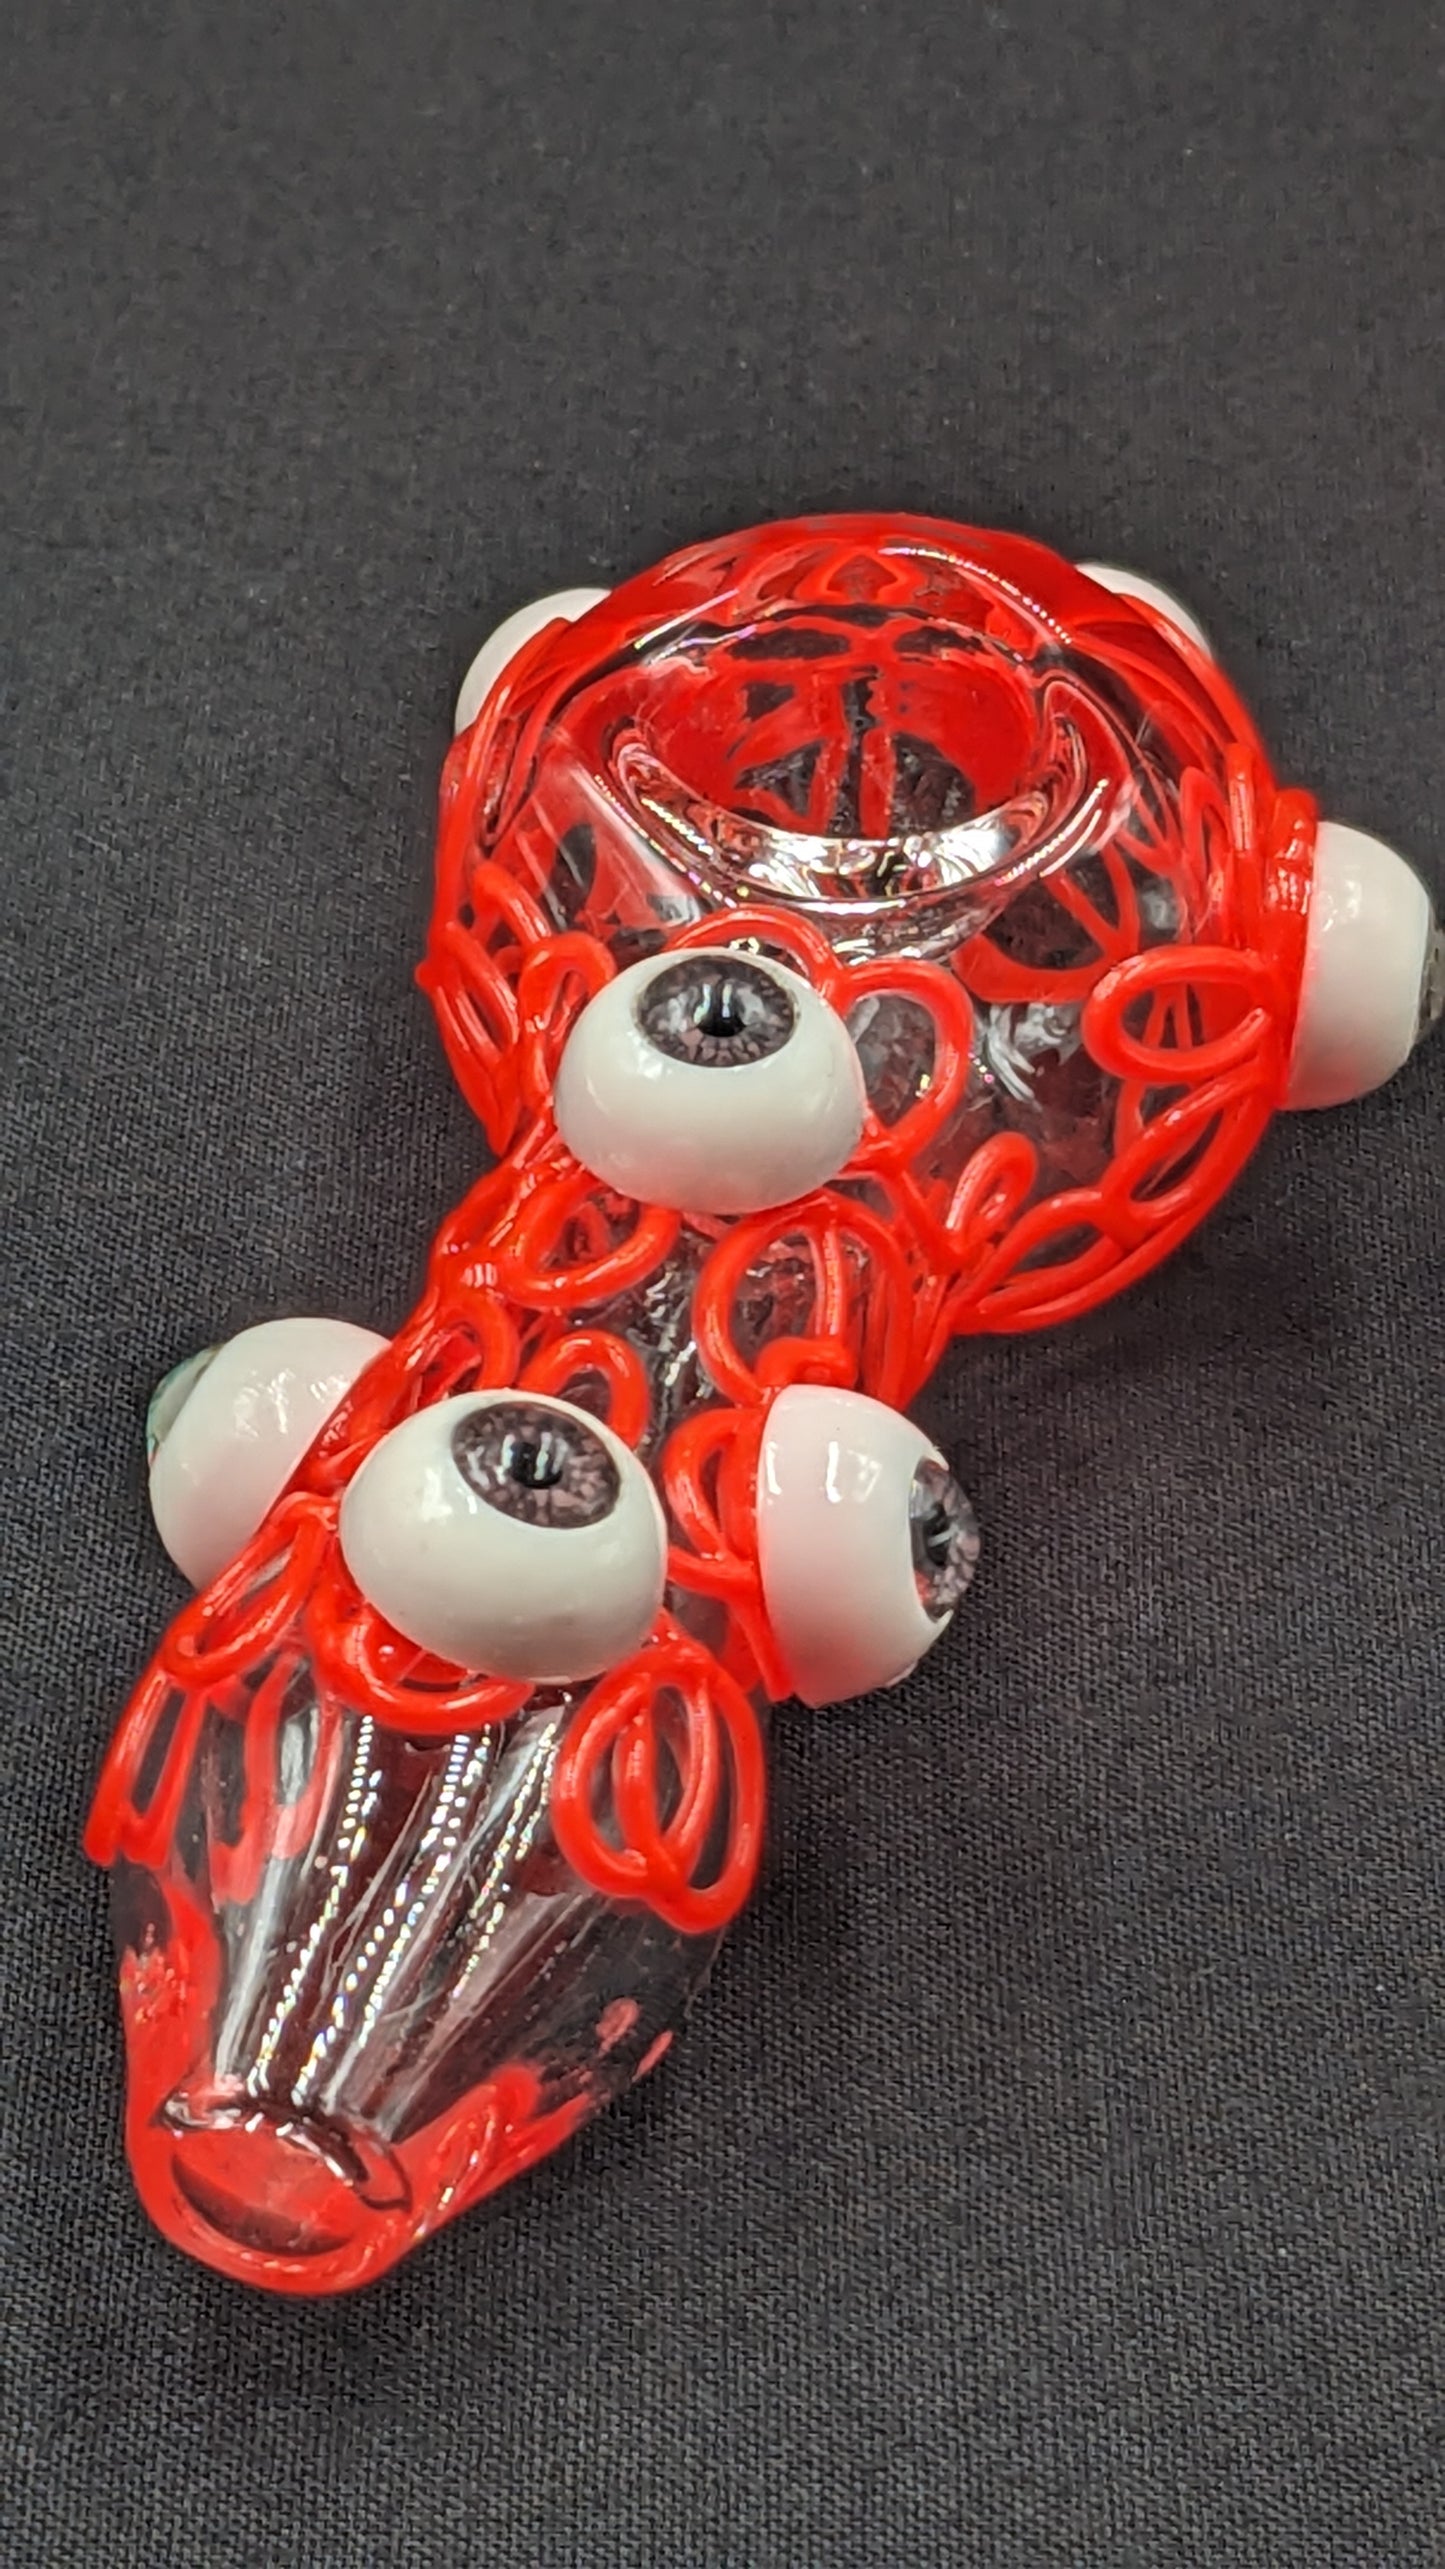 4" Crazy Eyes Glow In The Dark Glass Spoon Red